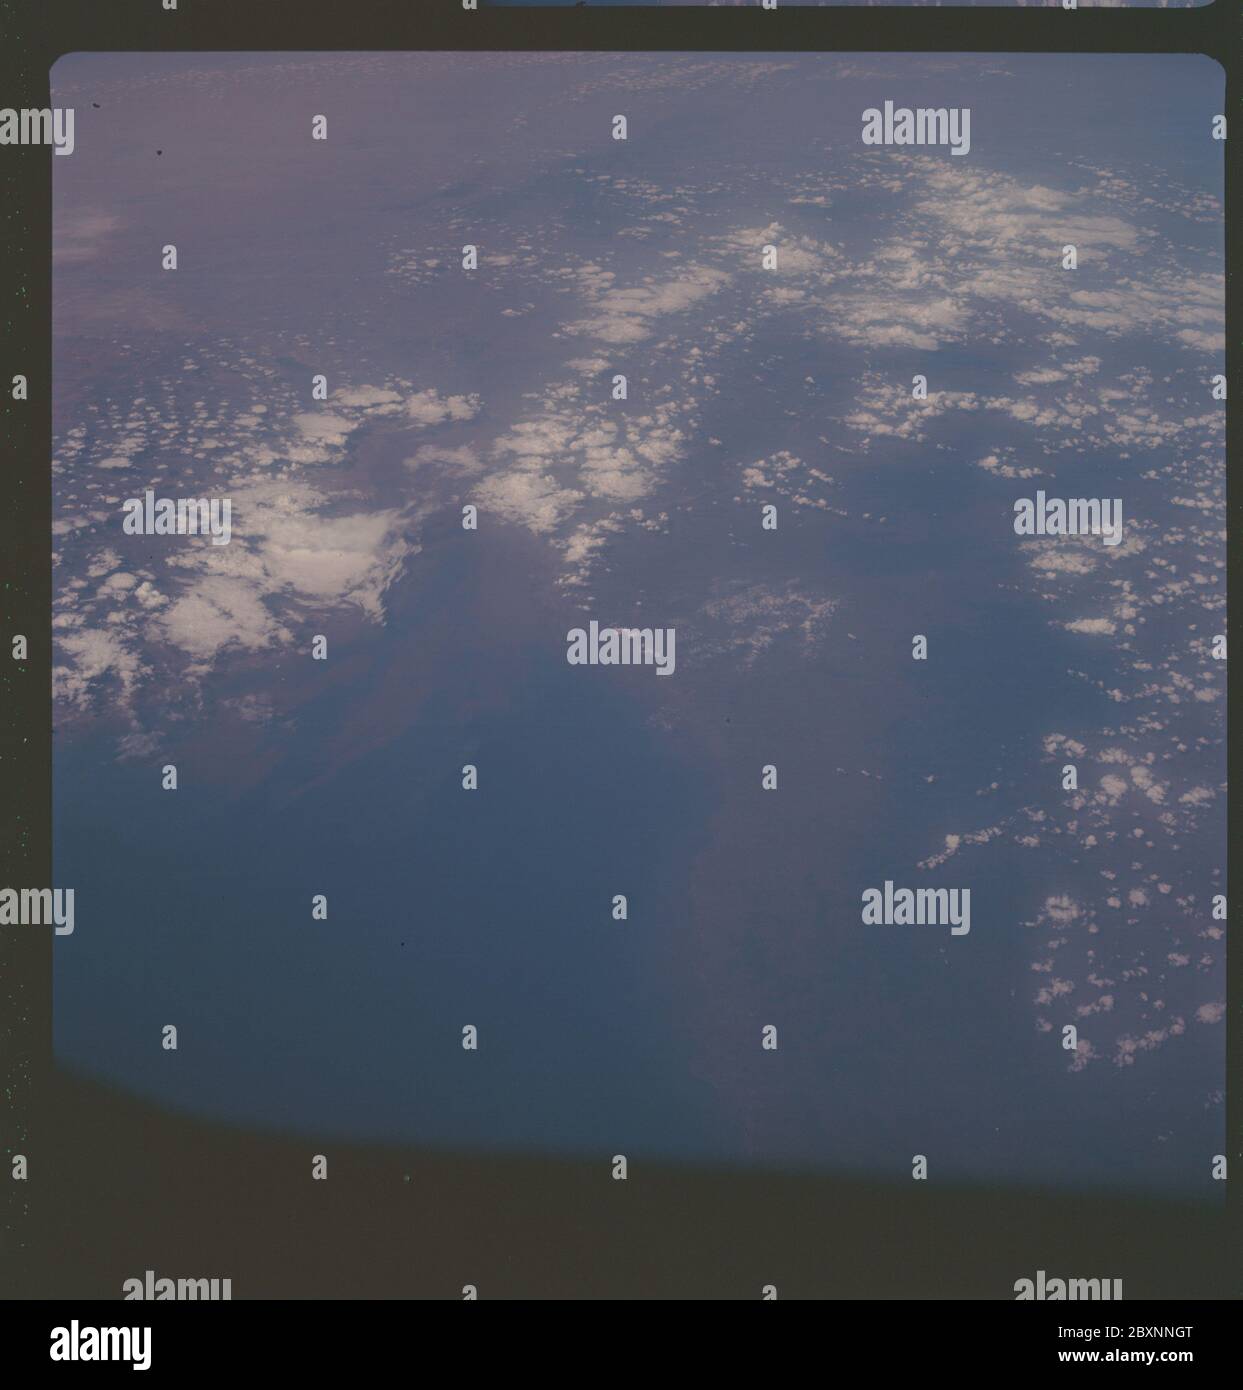 AS07-06-1706 - Apollo 7 - Apollo 7 Mission, India, Gulf of Cambay; Scope and content:  The original database describes this as: Description: Apollo 7,India,Gulf of Cambay. Dark,low oblique. Cloud Cover 35%%. Latitude: Altitude: 122 miles. 21 degrees 00' North,Longitude: 73 degrees 00' East. Original film magazine was labeled O. Camera Data: Hasselblad 500-C; Lens: Zeiss Planar,F/2.8,80mm; Film Type: Kodak SO-121,Aerial Ektachrome; Filter: Wratten 2A. Flight Date: October 11-12. 1968. Subject Terms: Apollo 7 Flight, Earth Observations (From Space), India, Asia Categories: Earth Observations Ori Stock Photo